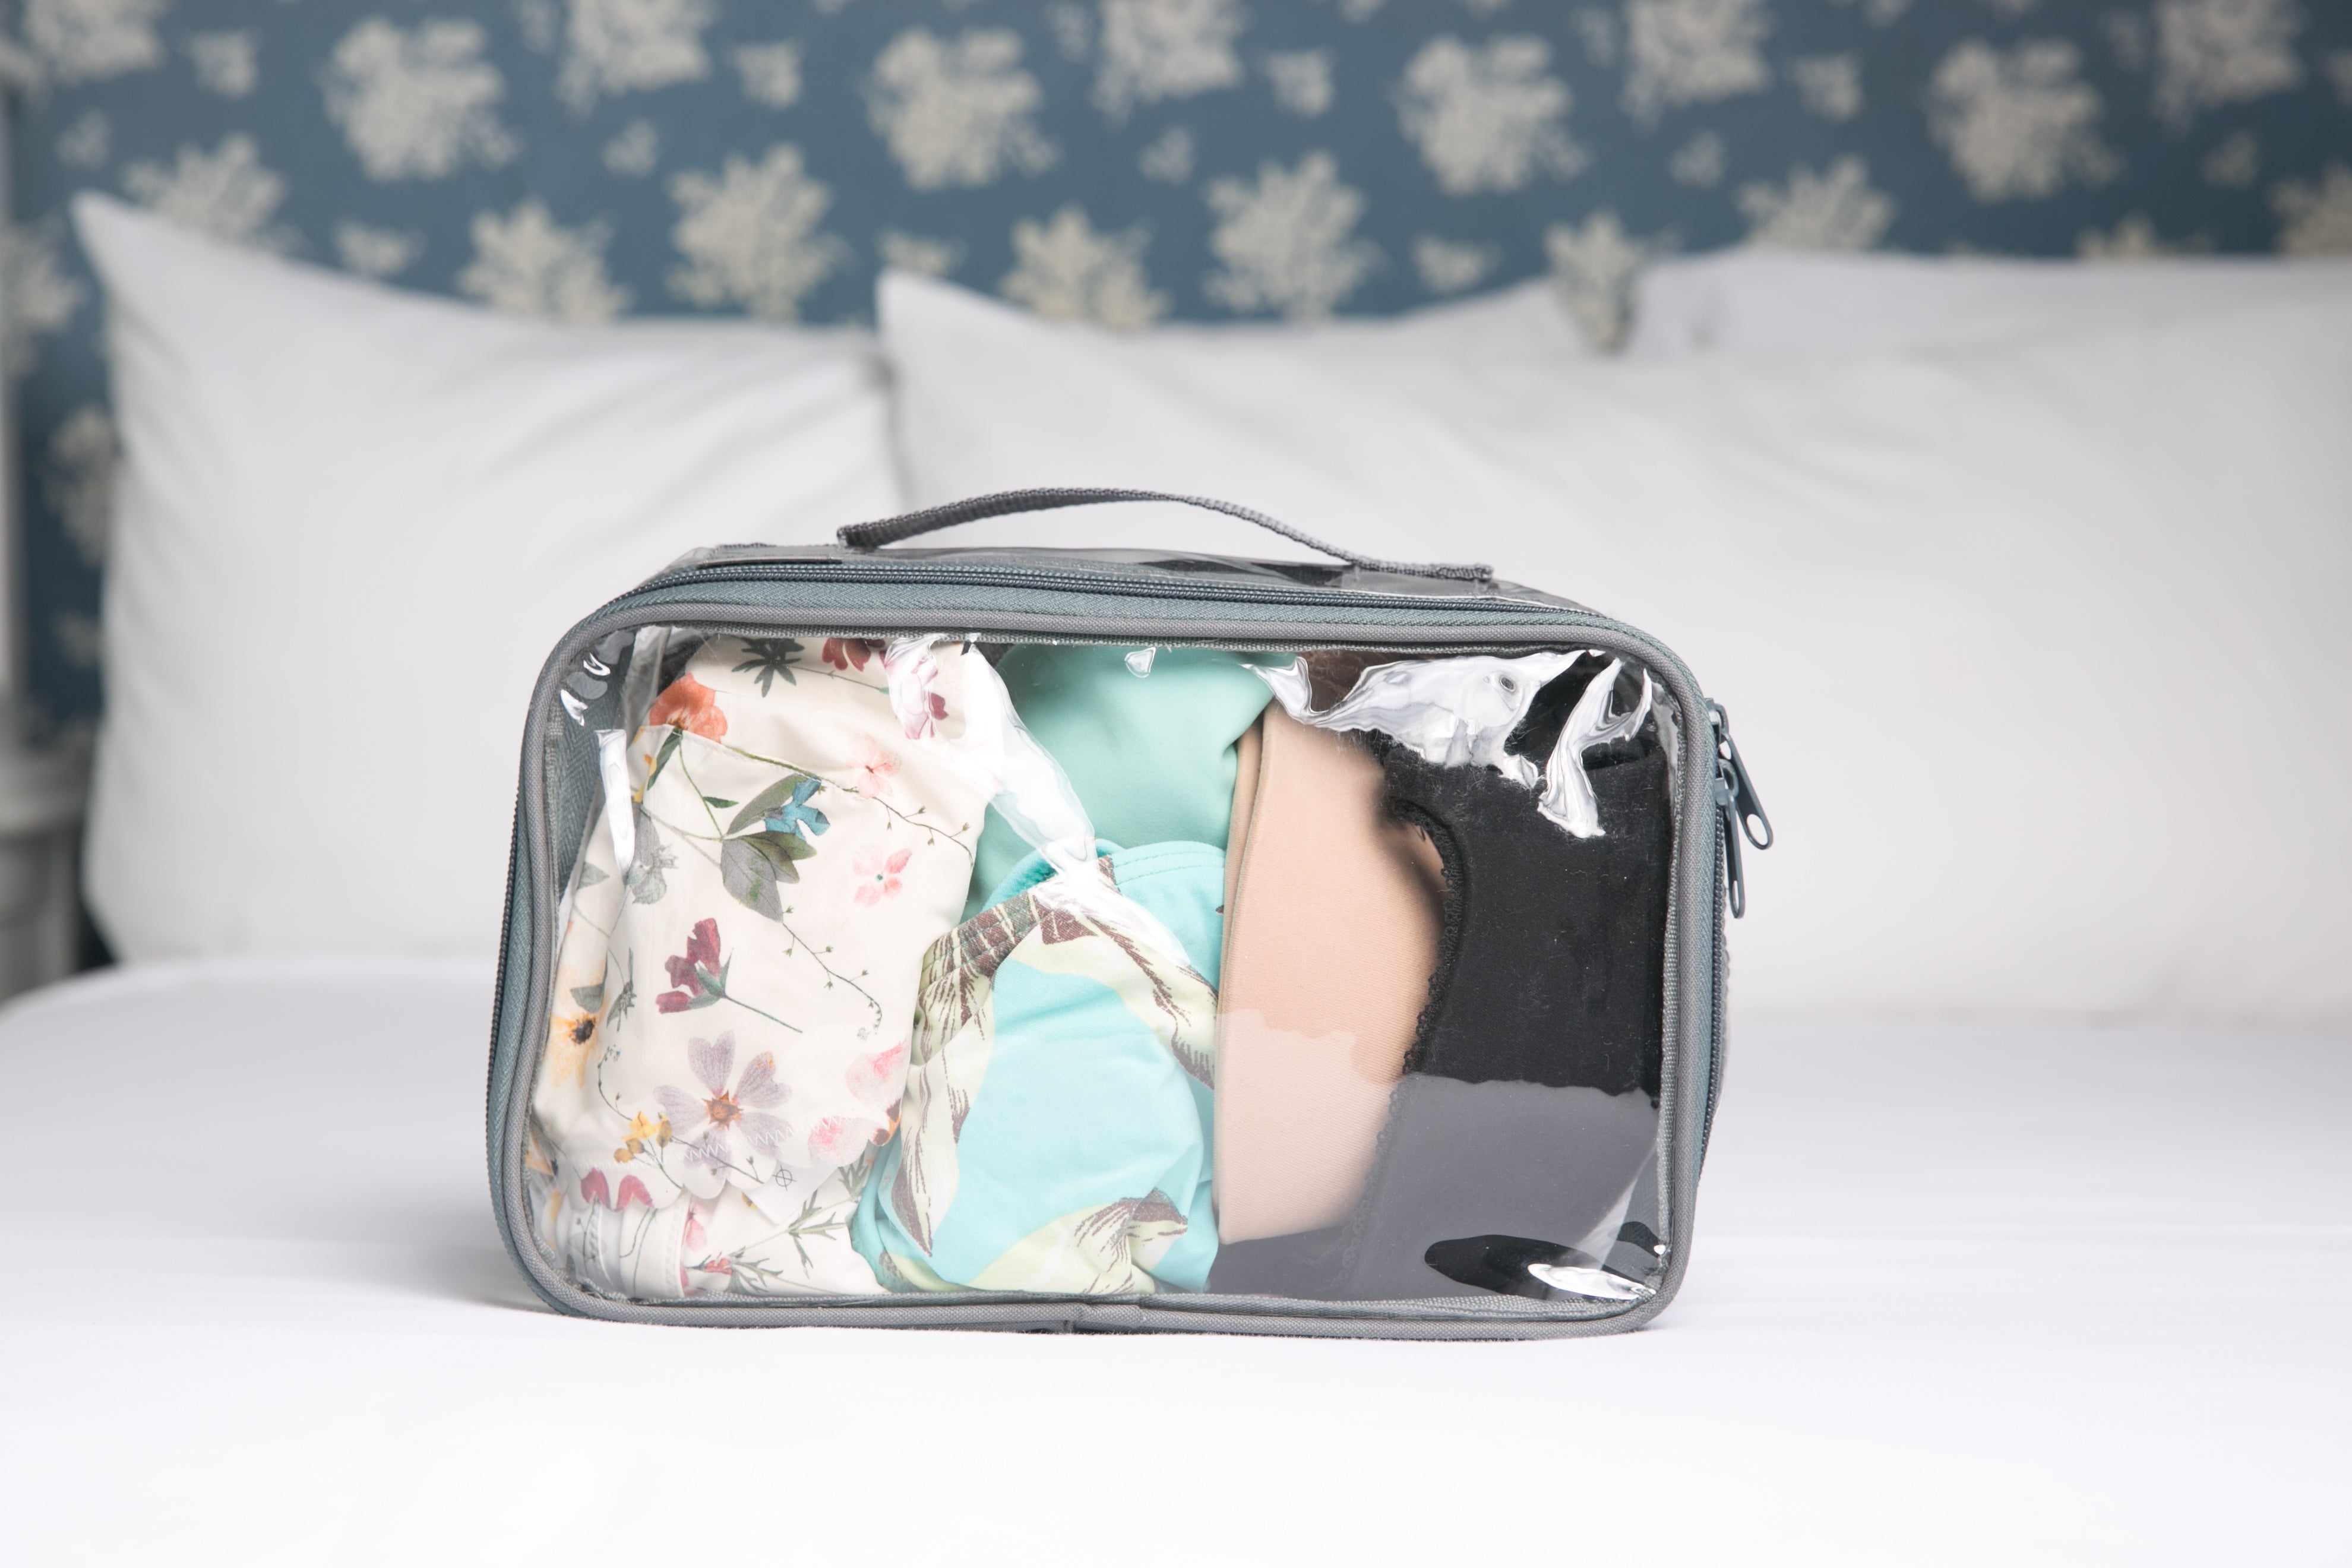 Clear packing cube with underwear and swimwear inside